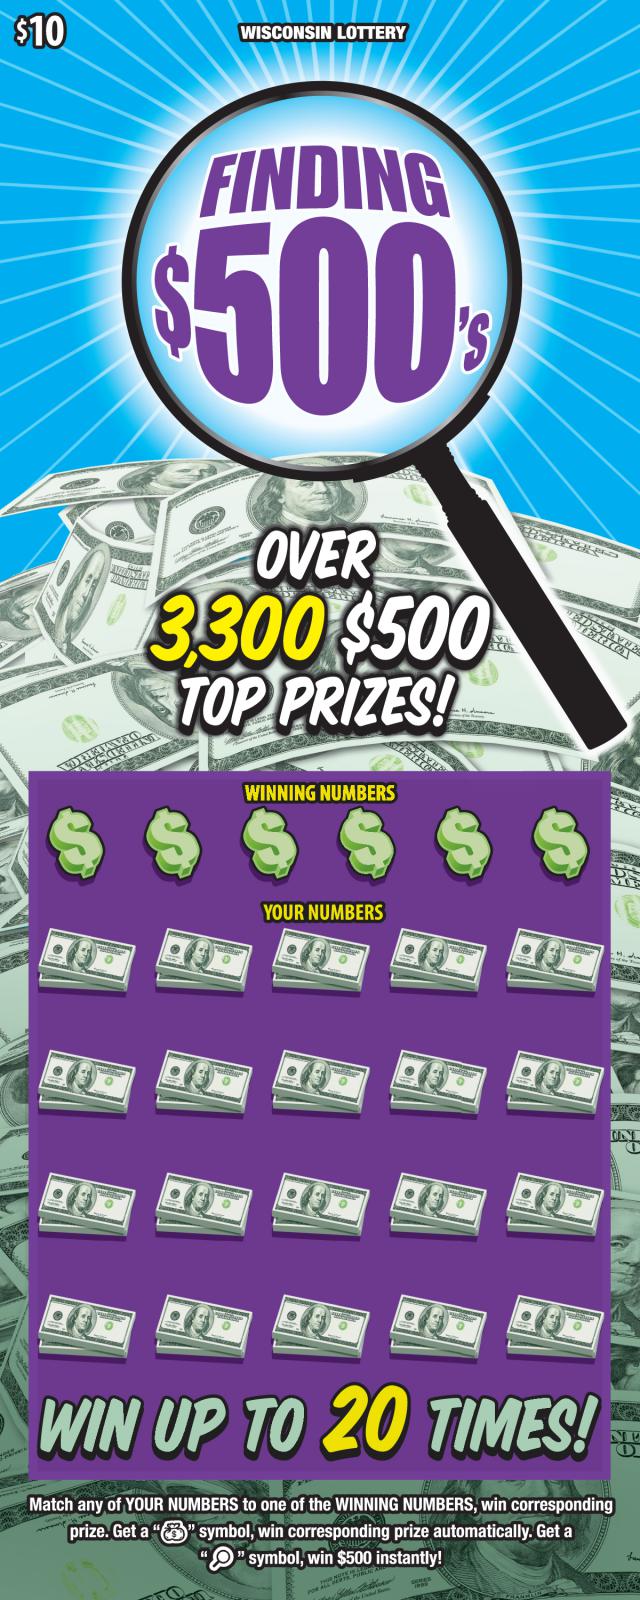 Finding $500's instant scratch ticket from Wisconsin Lottery - unscratched